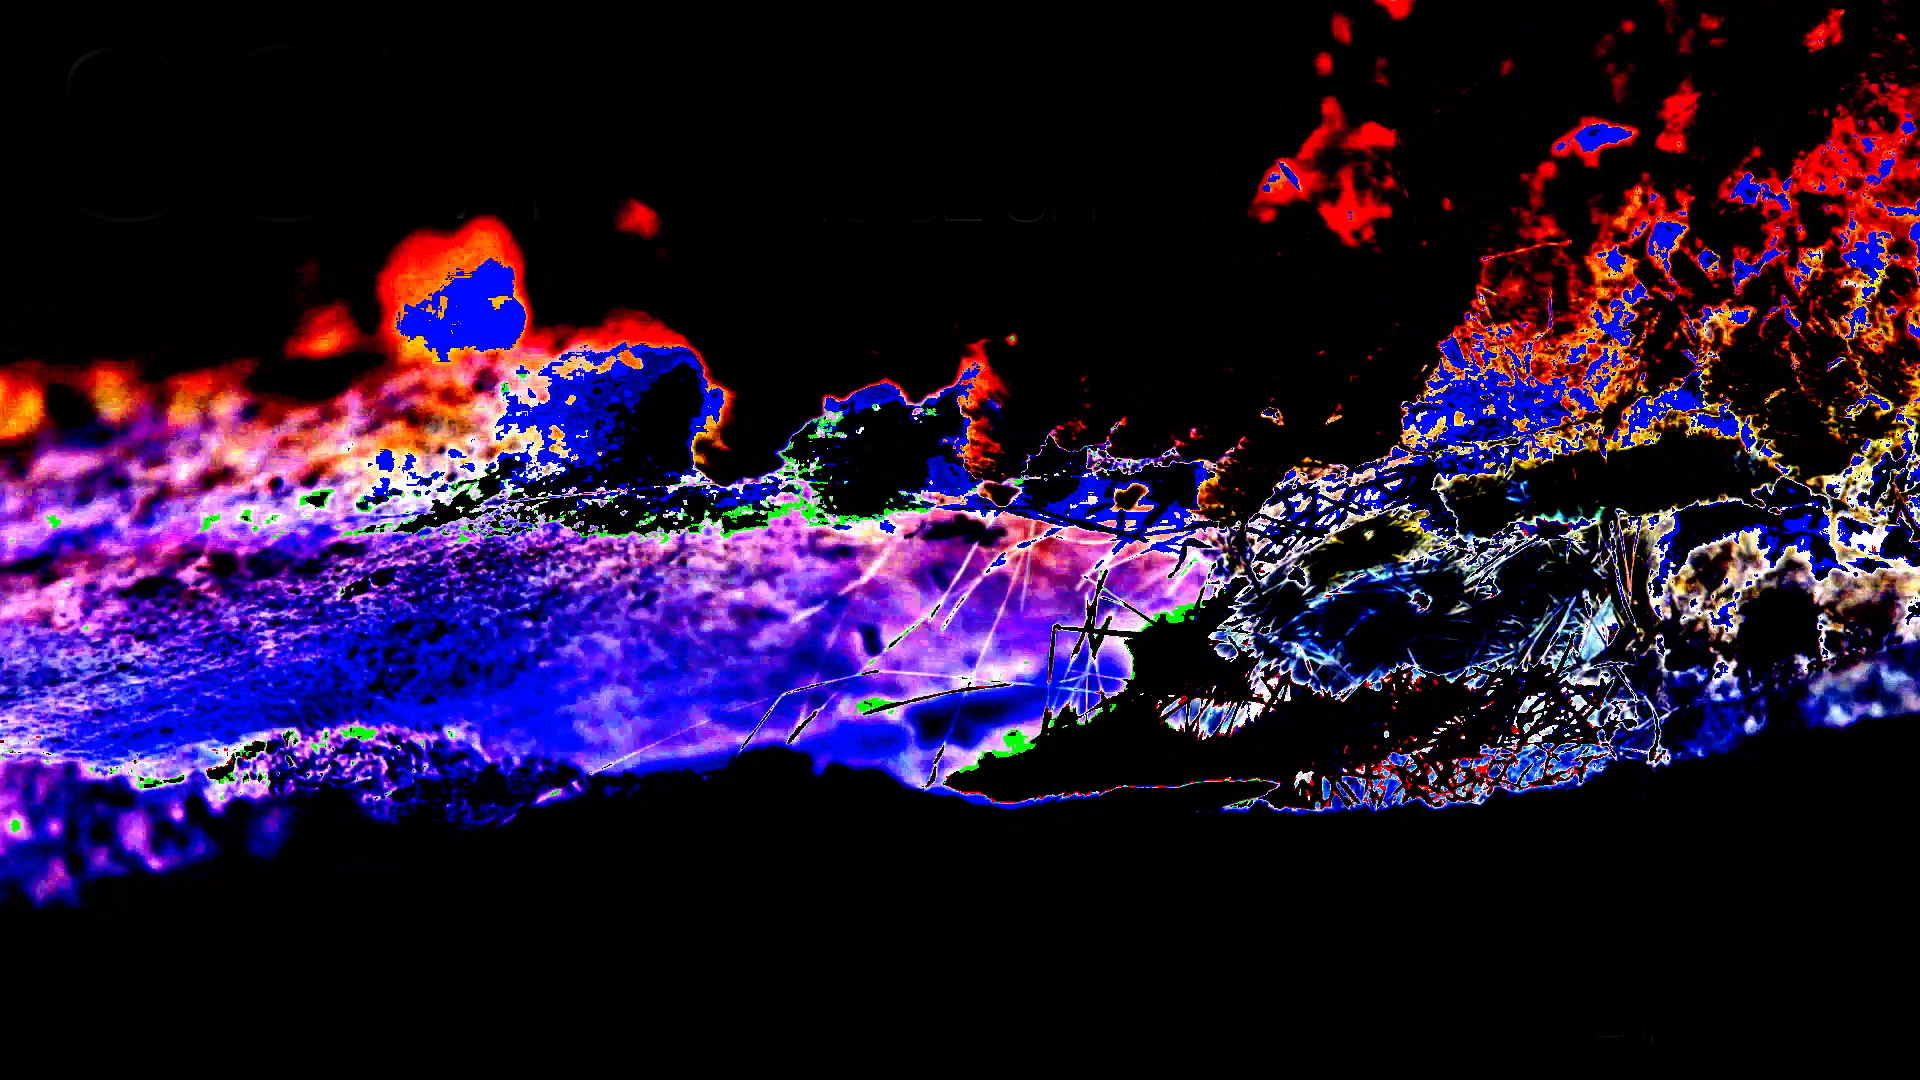 Abstract image like a splash of water against a black background